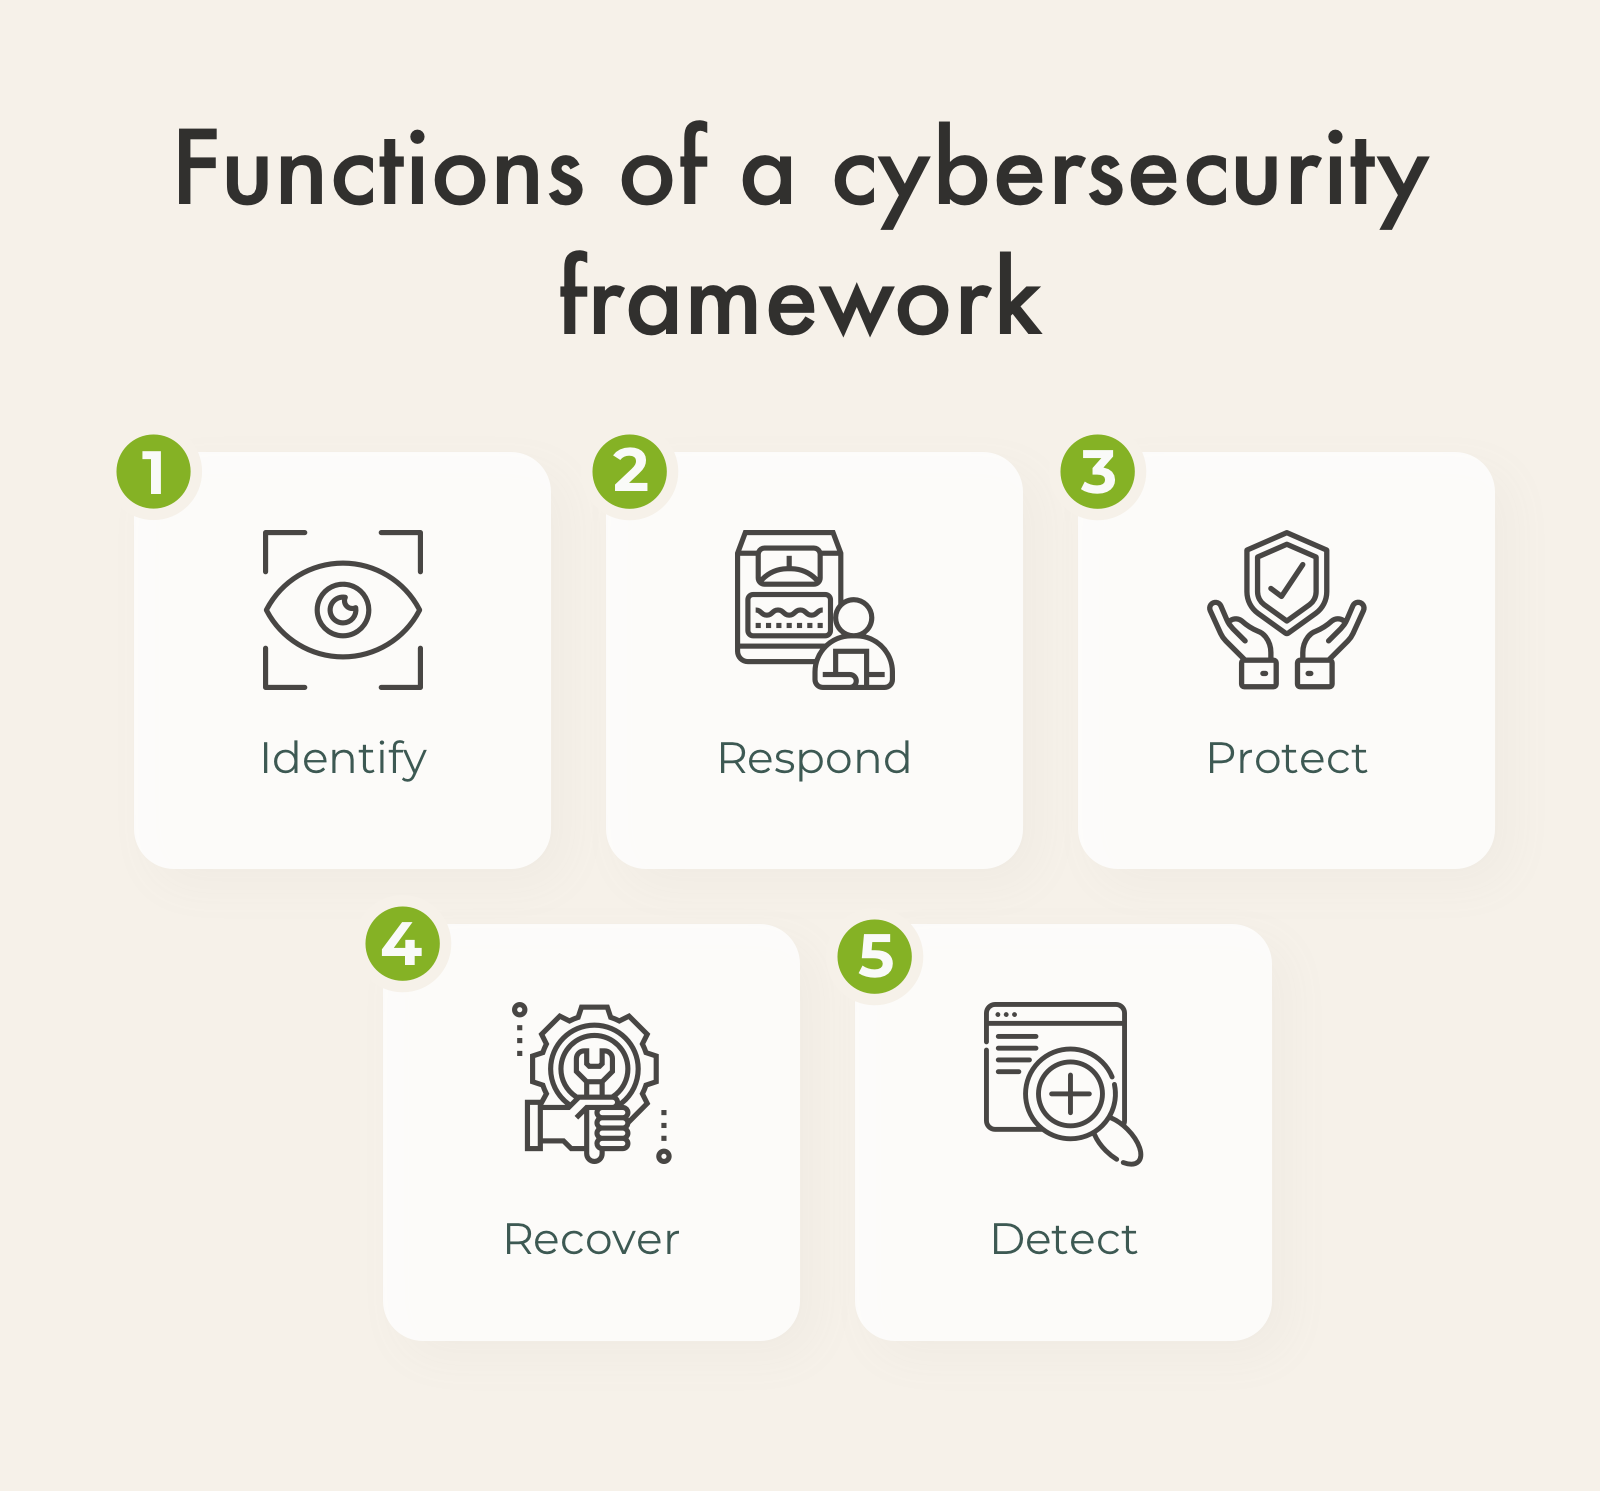 Functions of cyber security